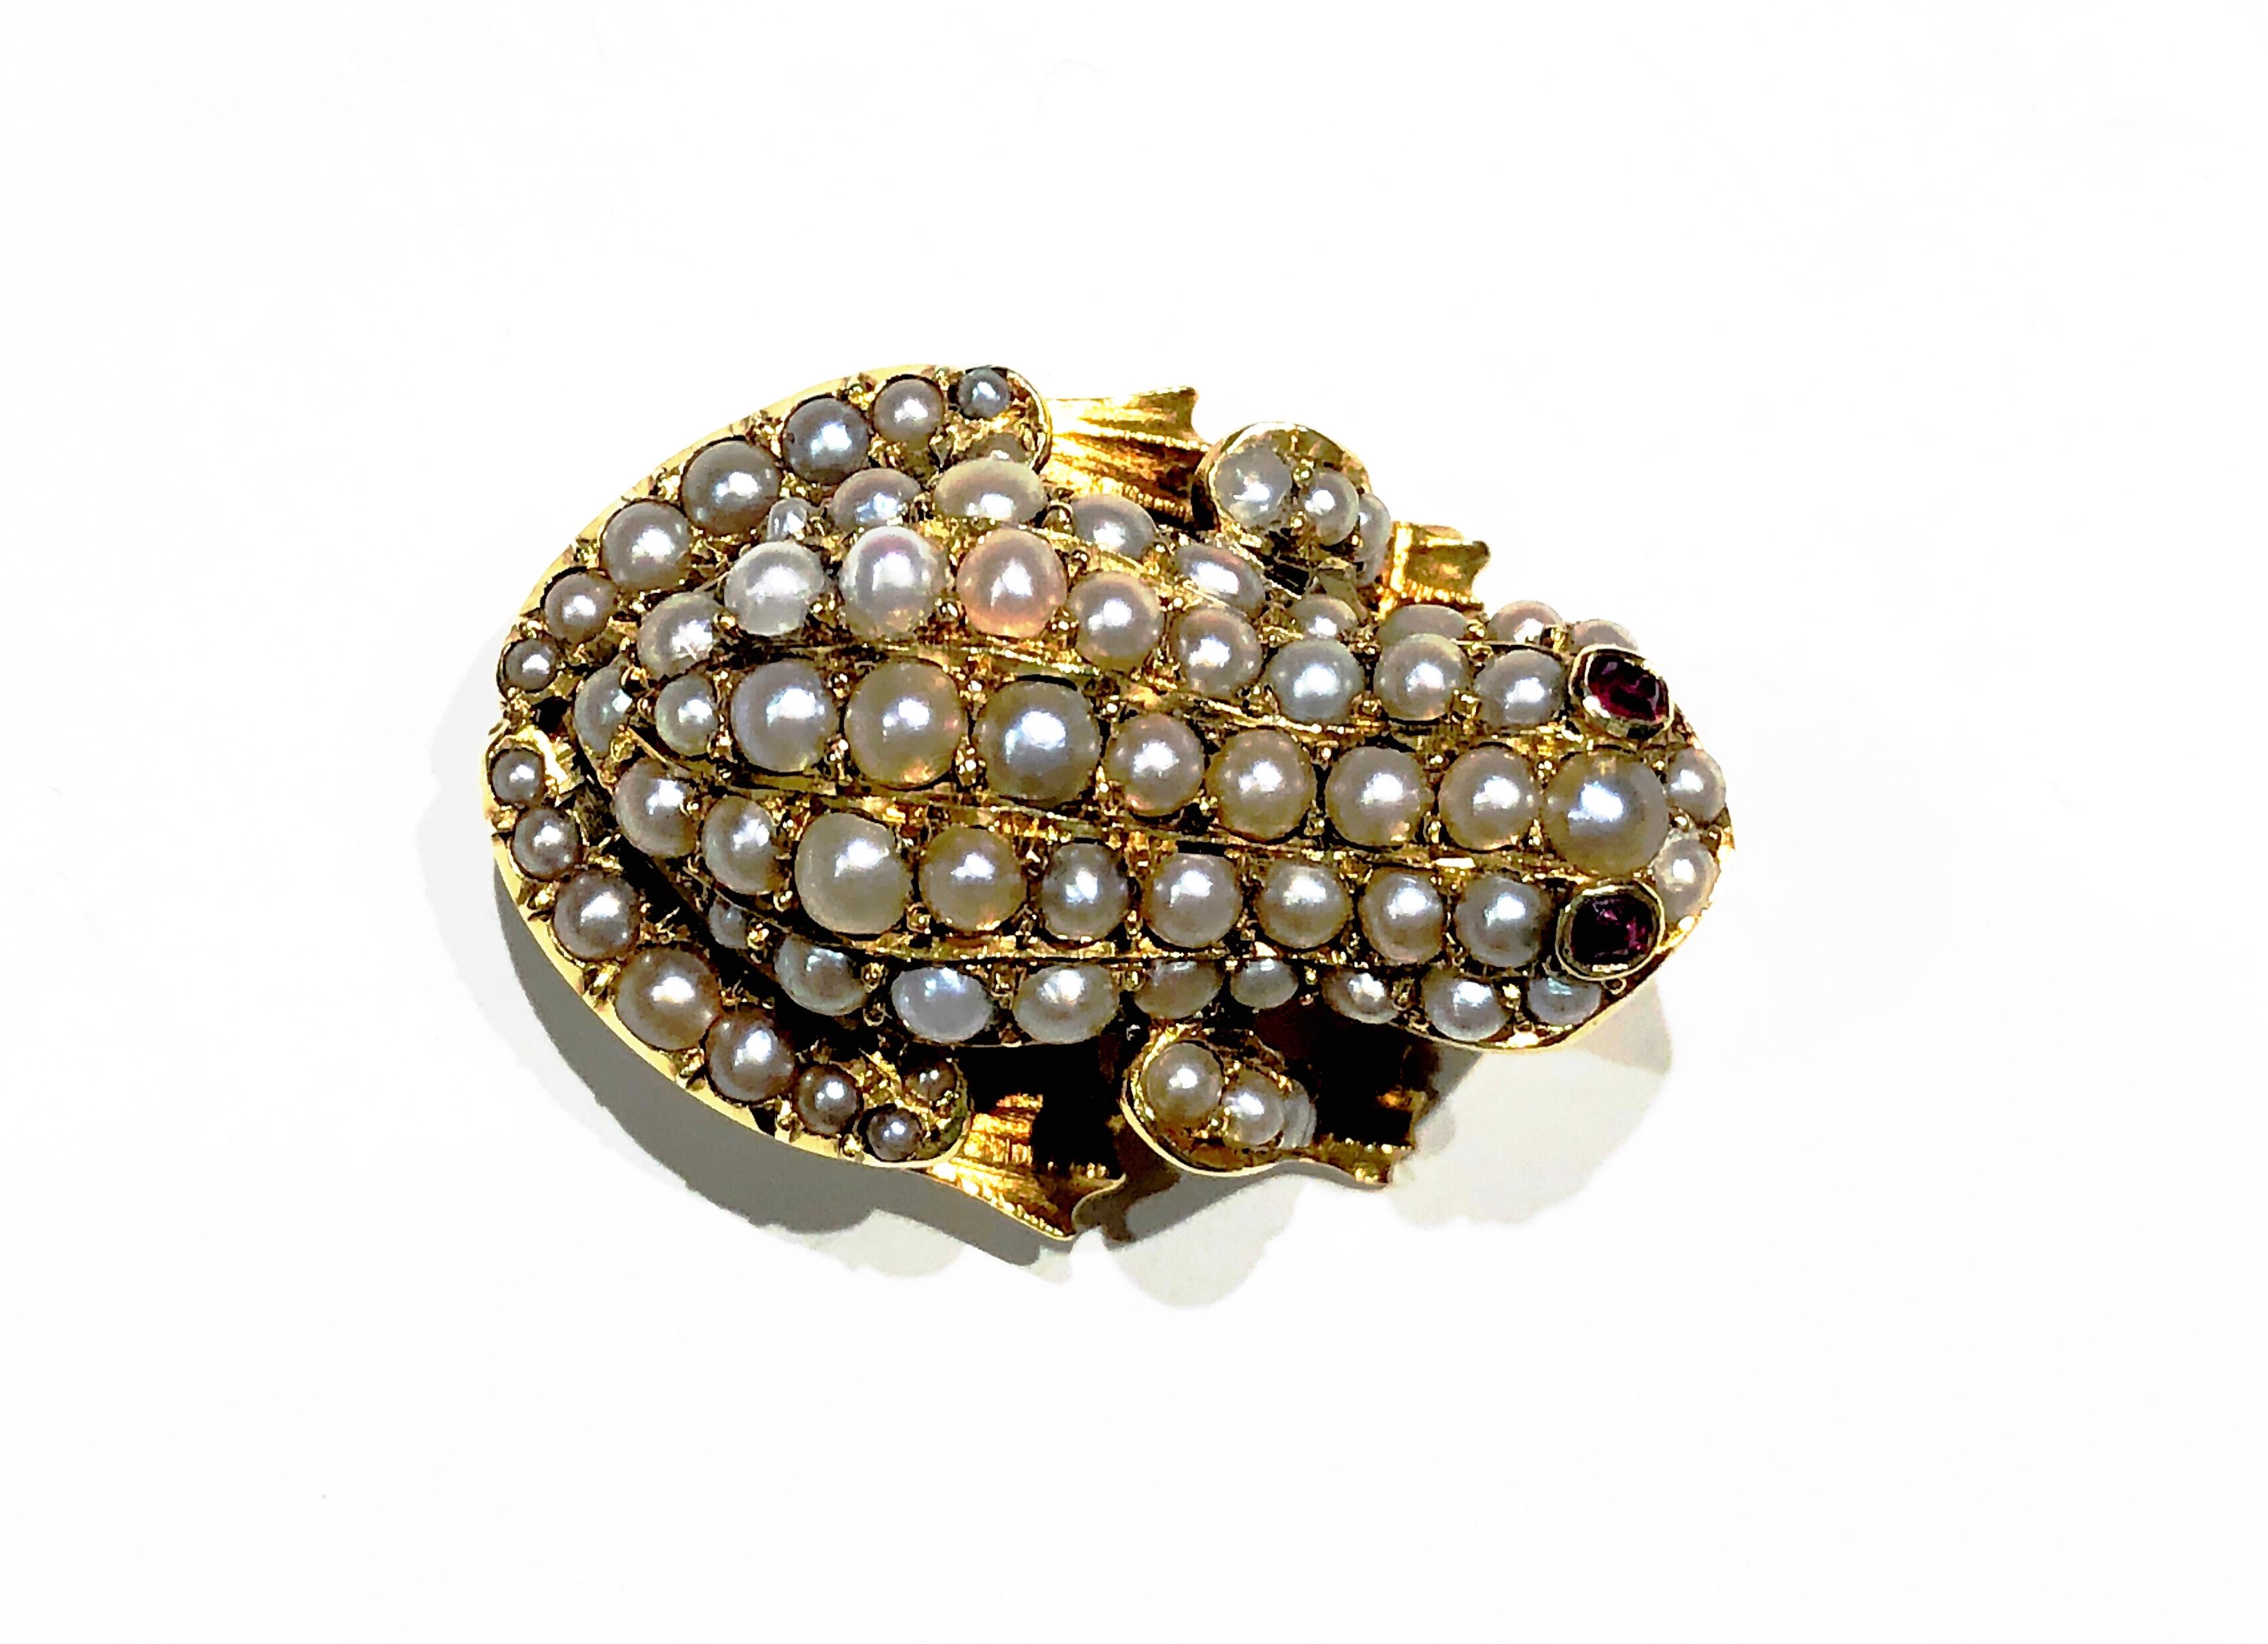 Antique Gold, Pearl and Ruby Frog Brooch, Circa 1900 For Sale 1